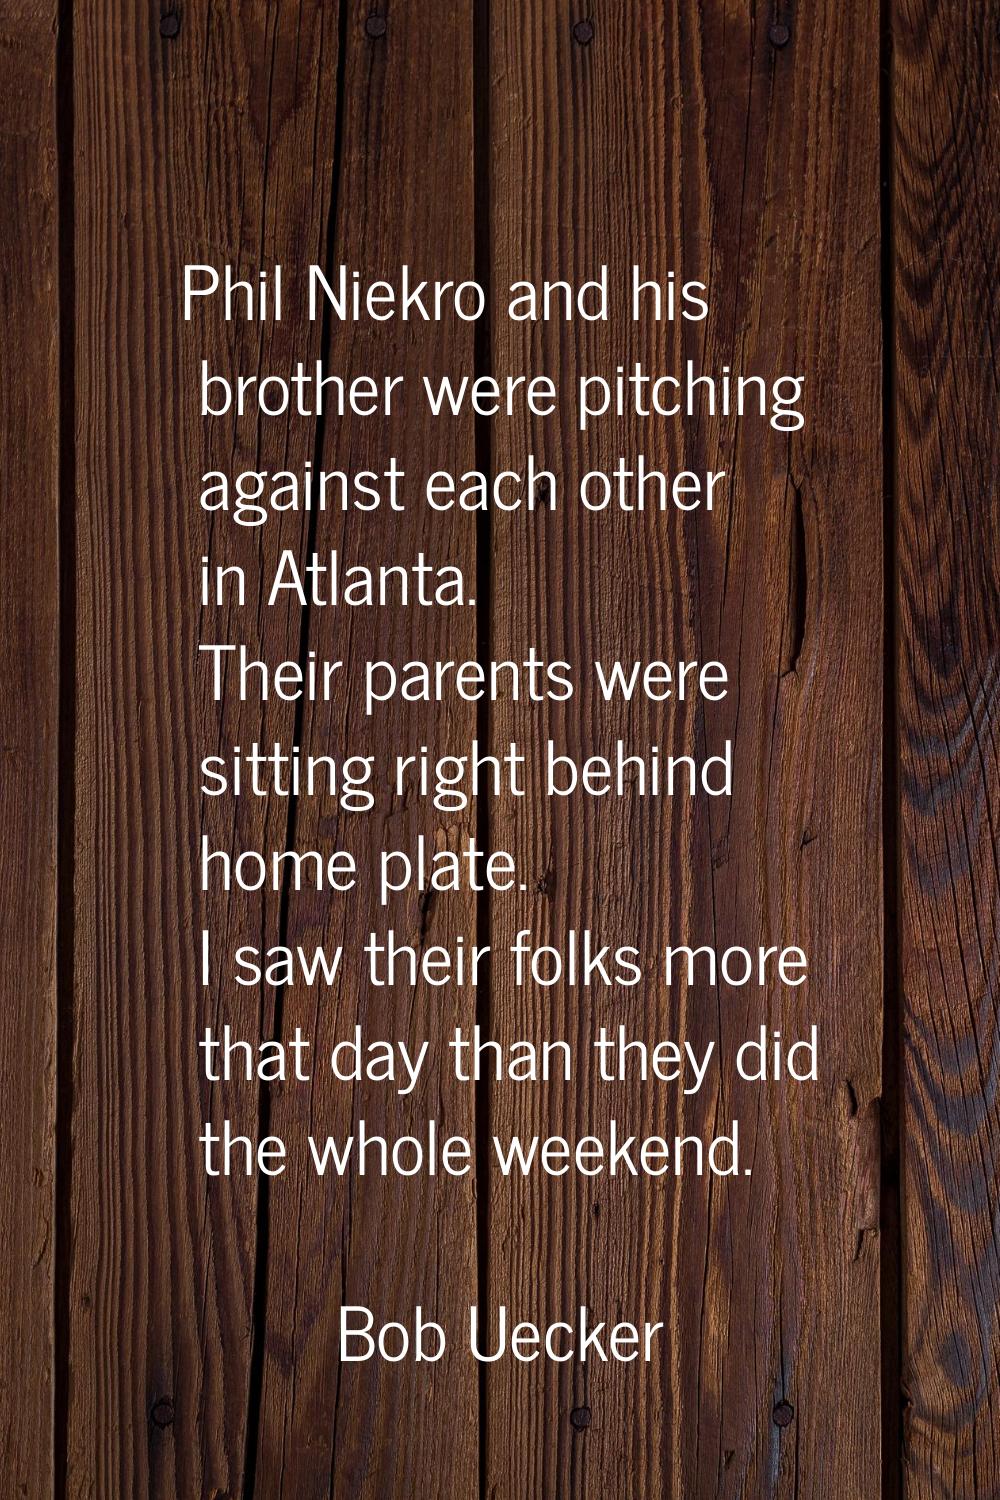 Phil Niekro and his brother were pitching against each other in Atlanta. Their parents were sitting